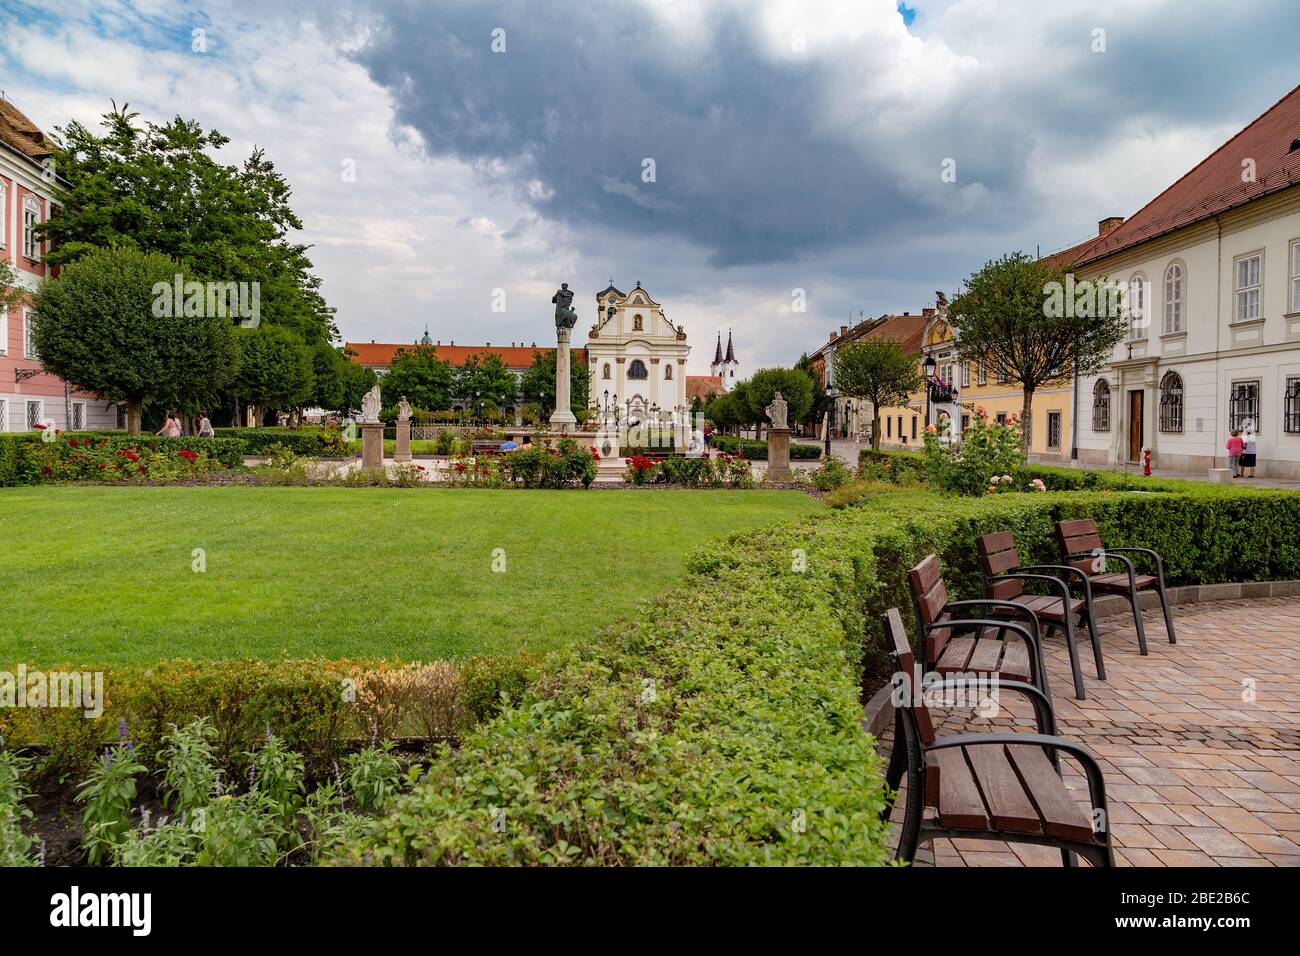 View of the main square (Marcius 15) in Vac dominated by the White Church,and the Town Hall, Hungarian baroque architecture.Hungary.Europe. Stock Photo